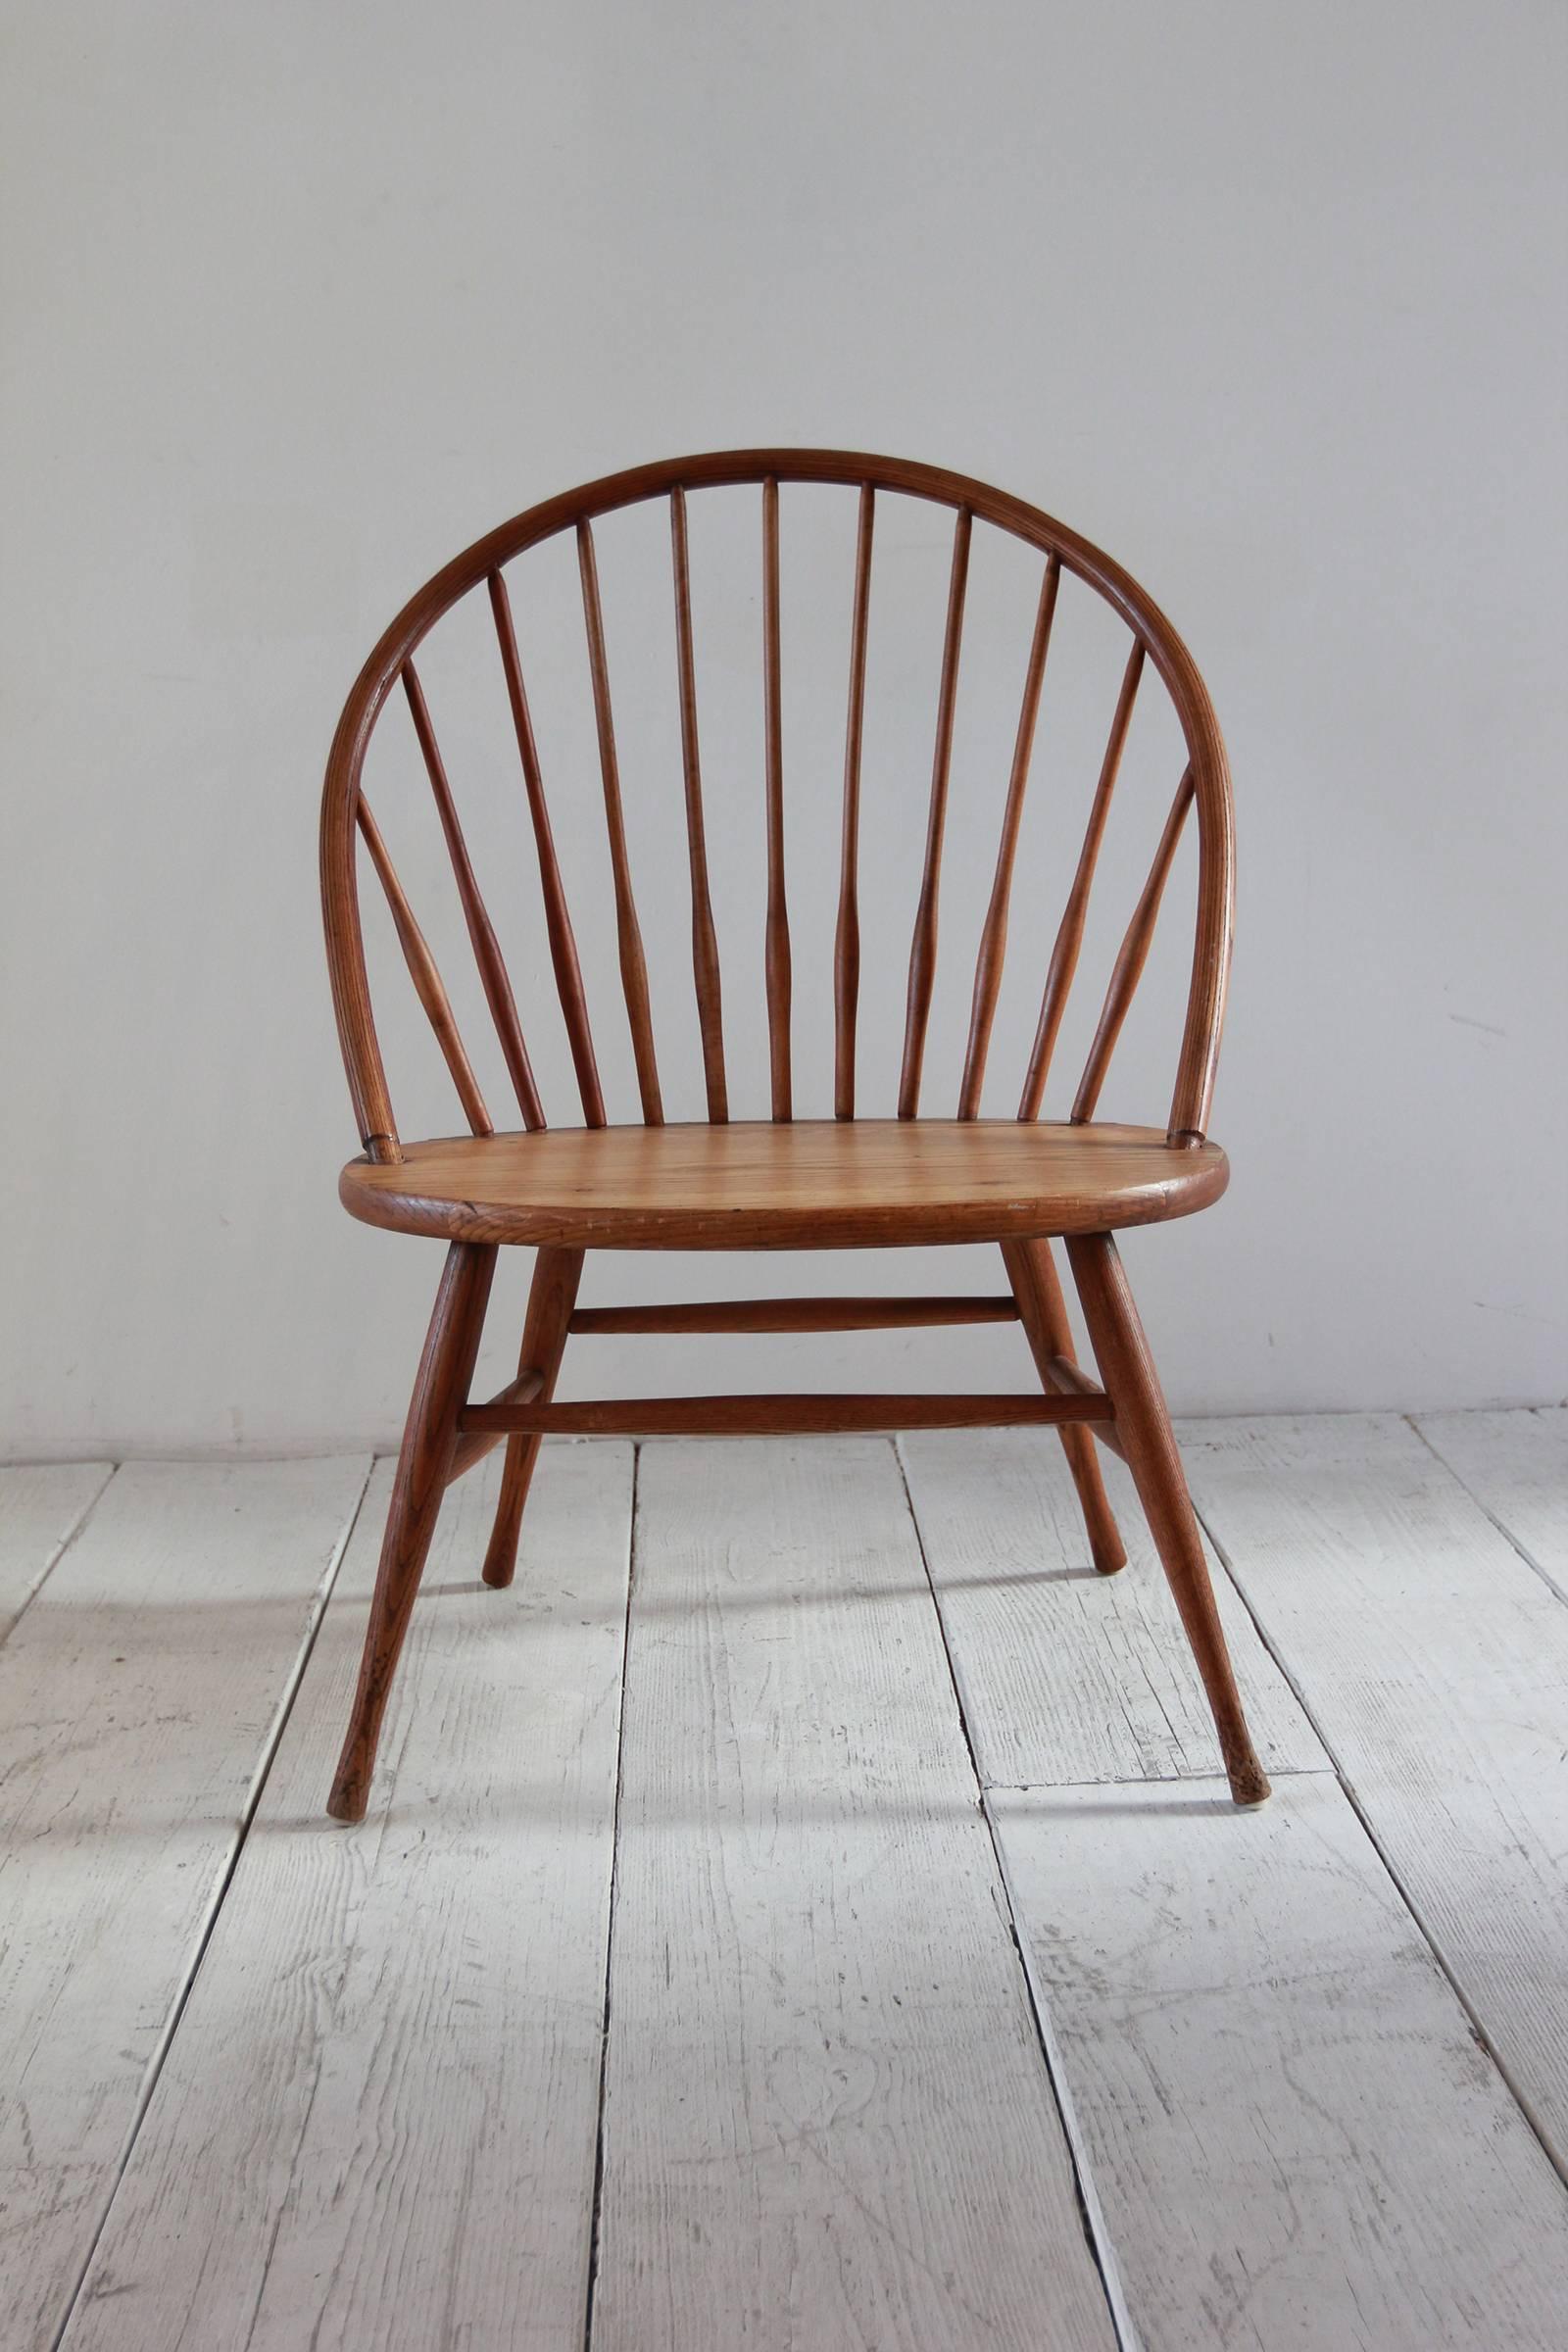 wooden spindle chair